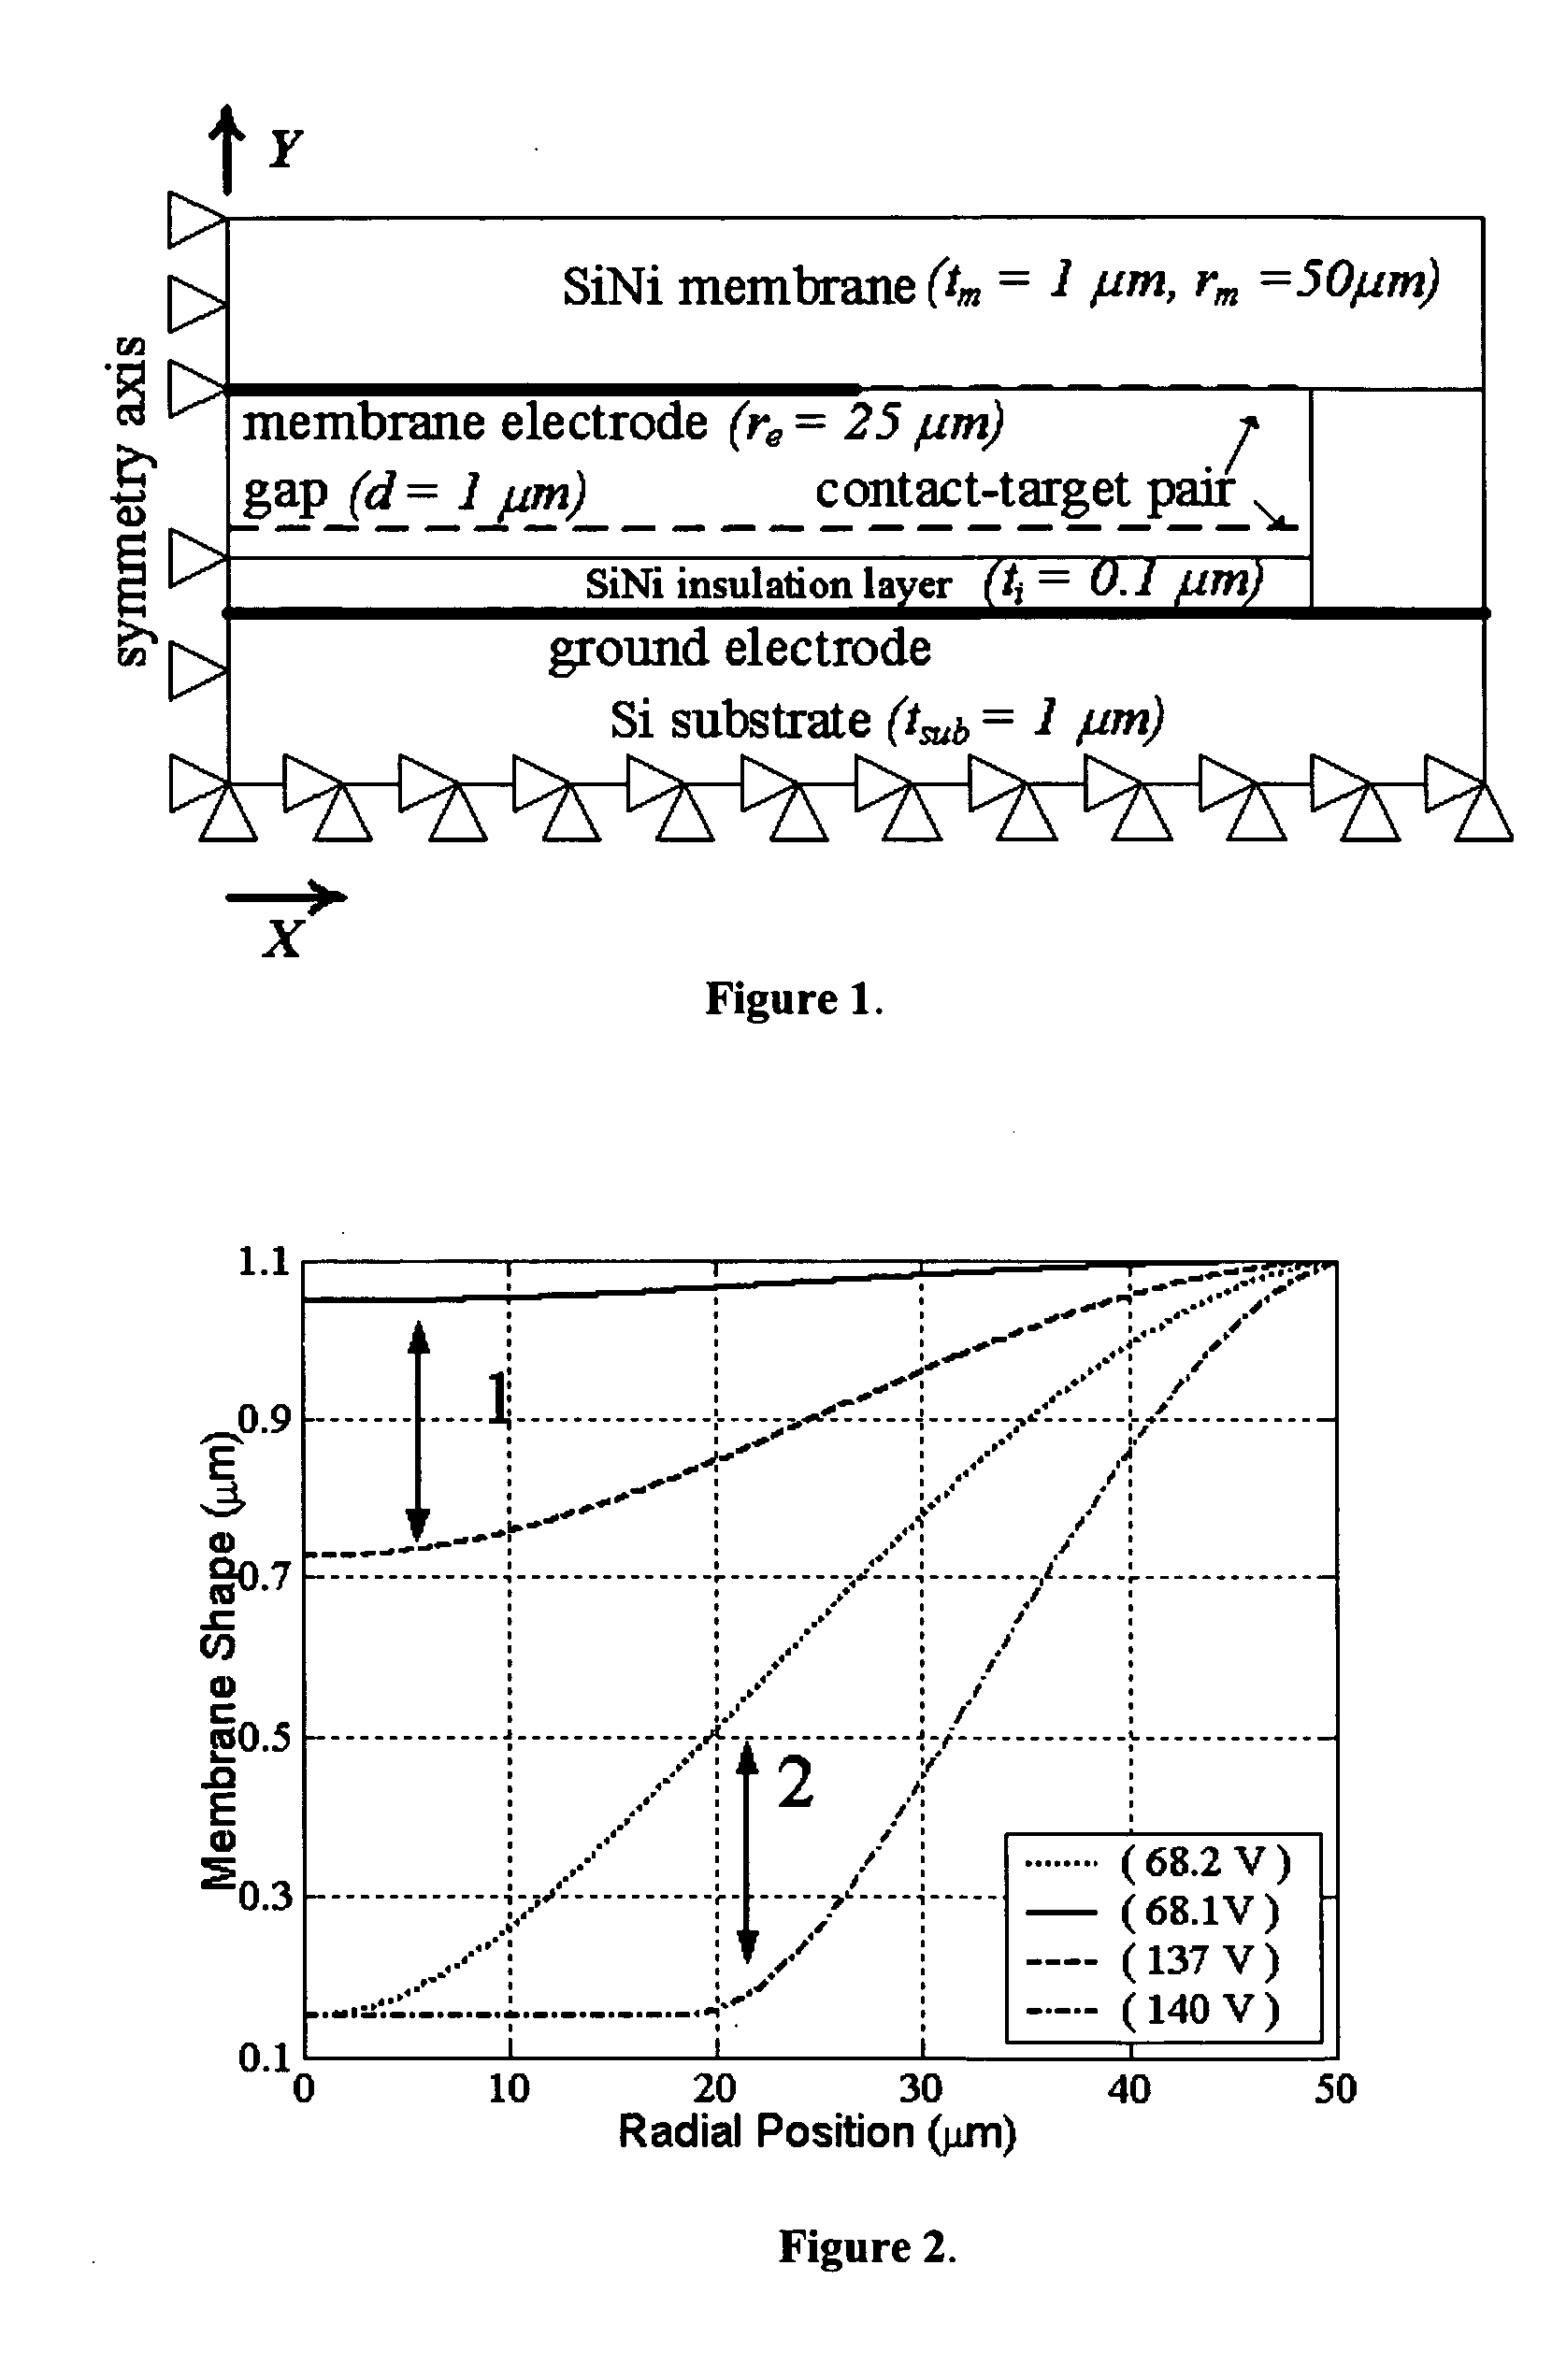 Method and system for operating capacitive membrane ultrasonic transducers